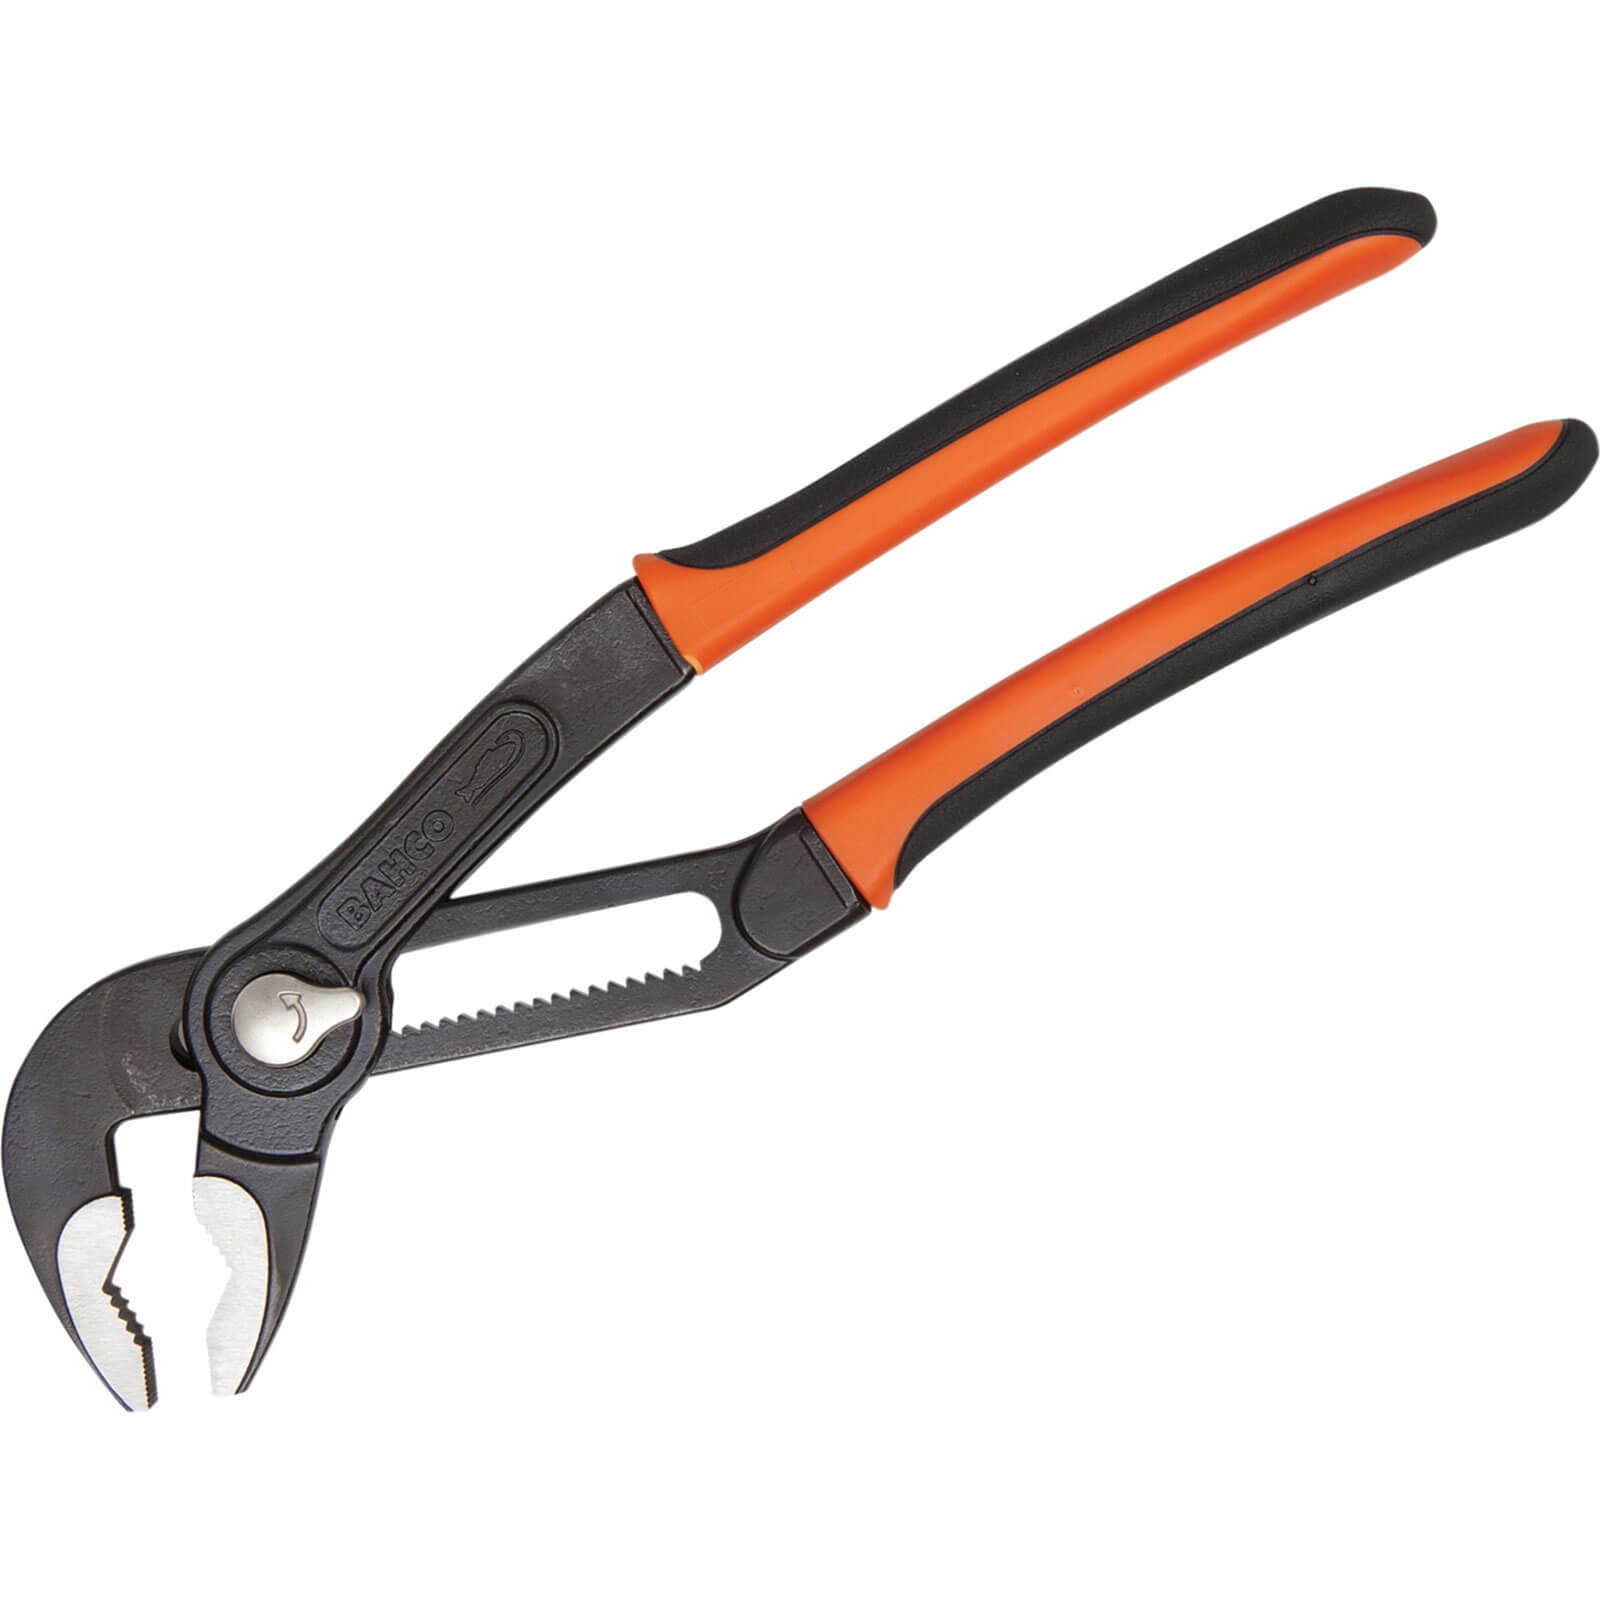 Bahco 7223 Quick Adjust Slip Joint Pliers 250mm